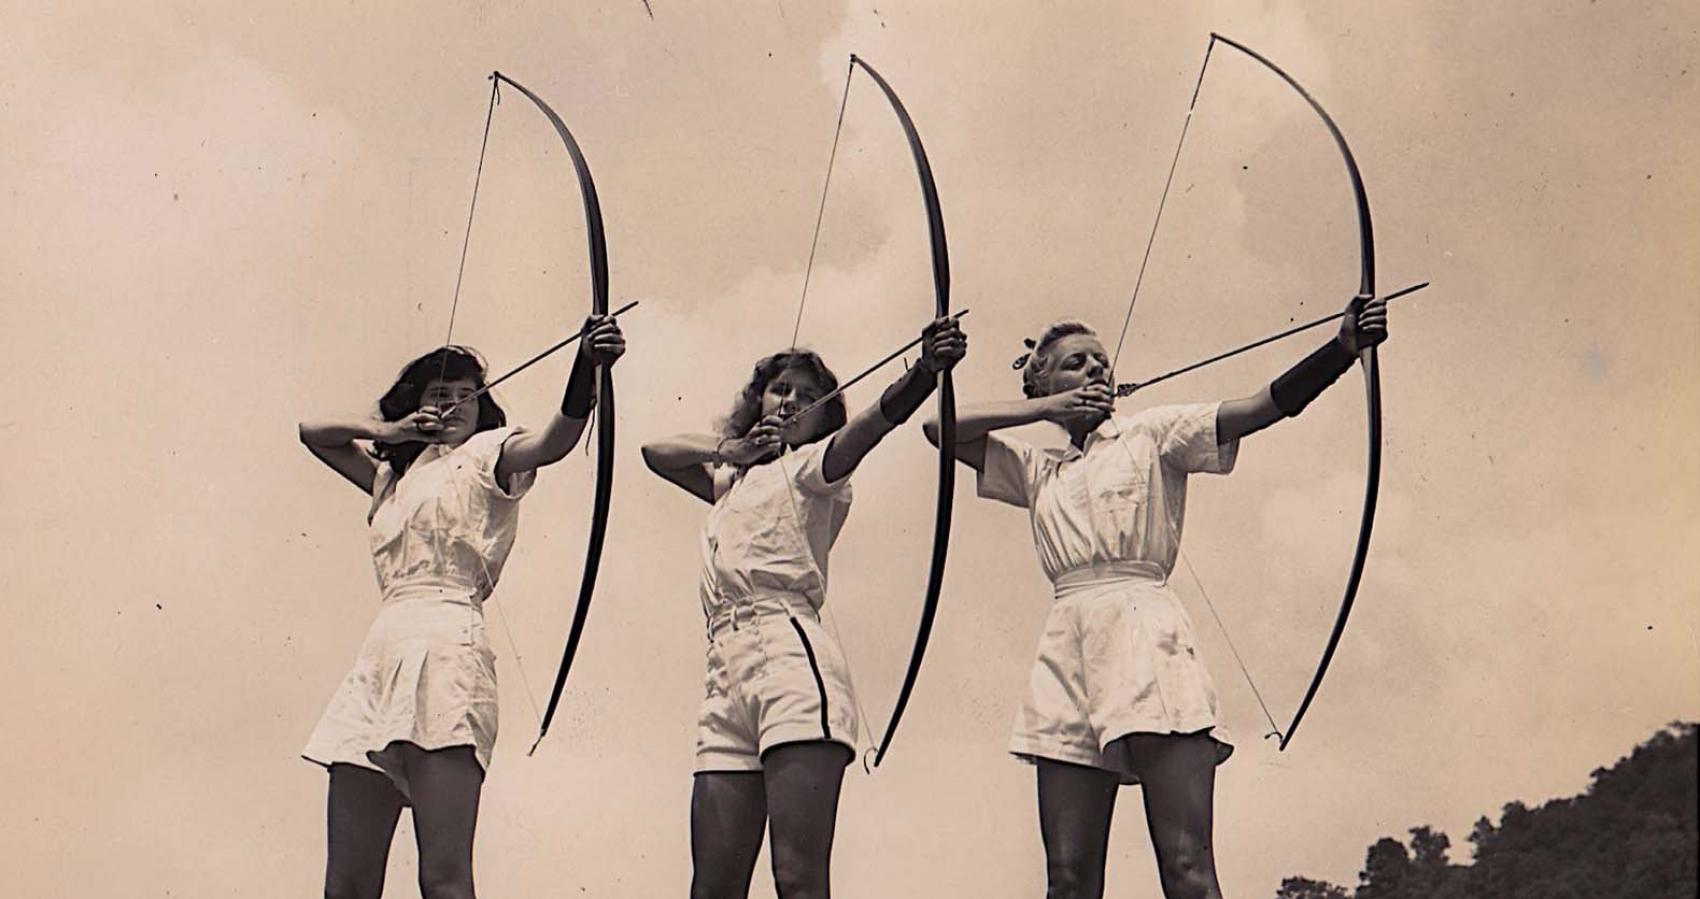 Historical photo of campers and archery